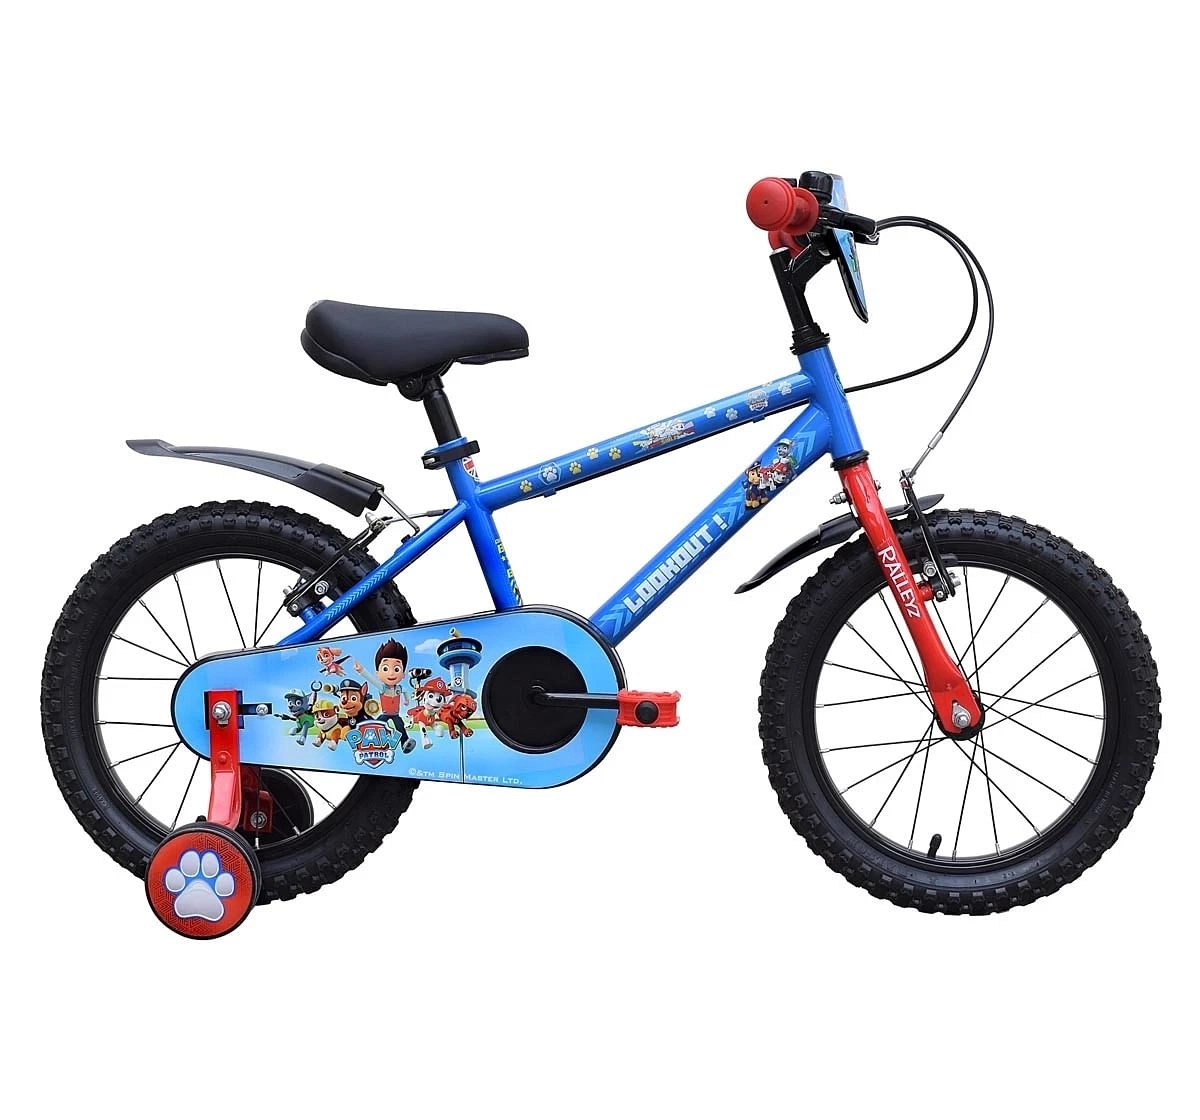 Ralleyz Astra Paw Patrol 1.0, 16 Inch, Bicycles For Kids, Blue, 5Y+